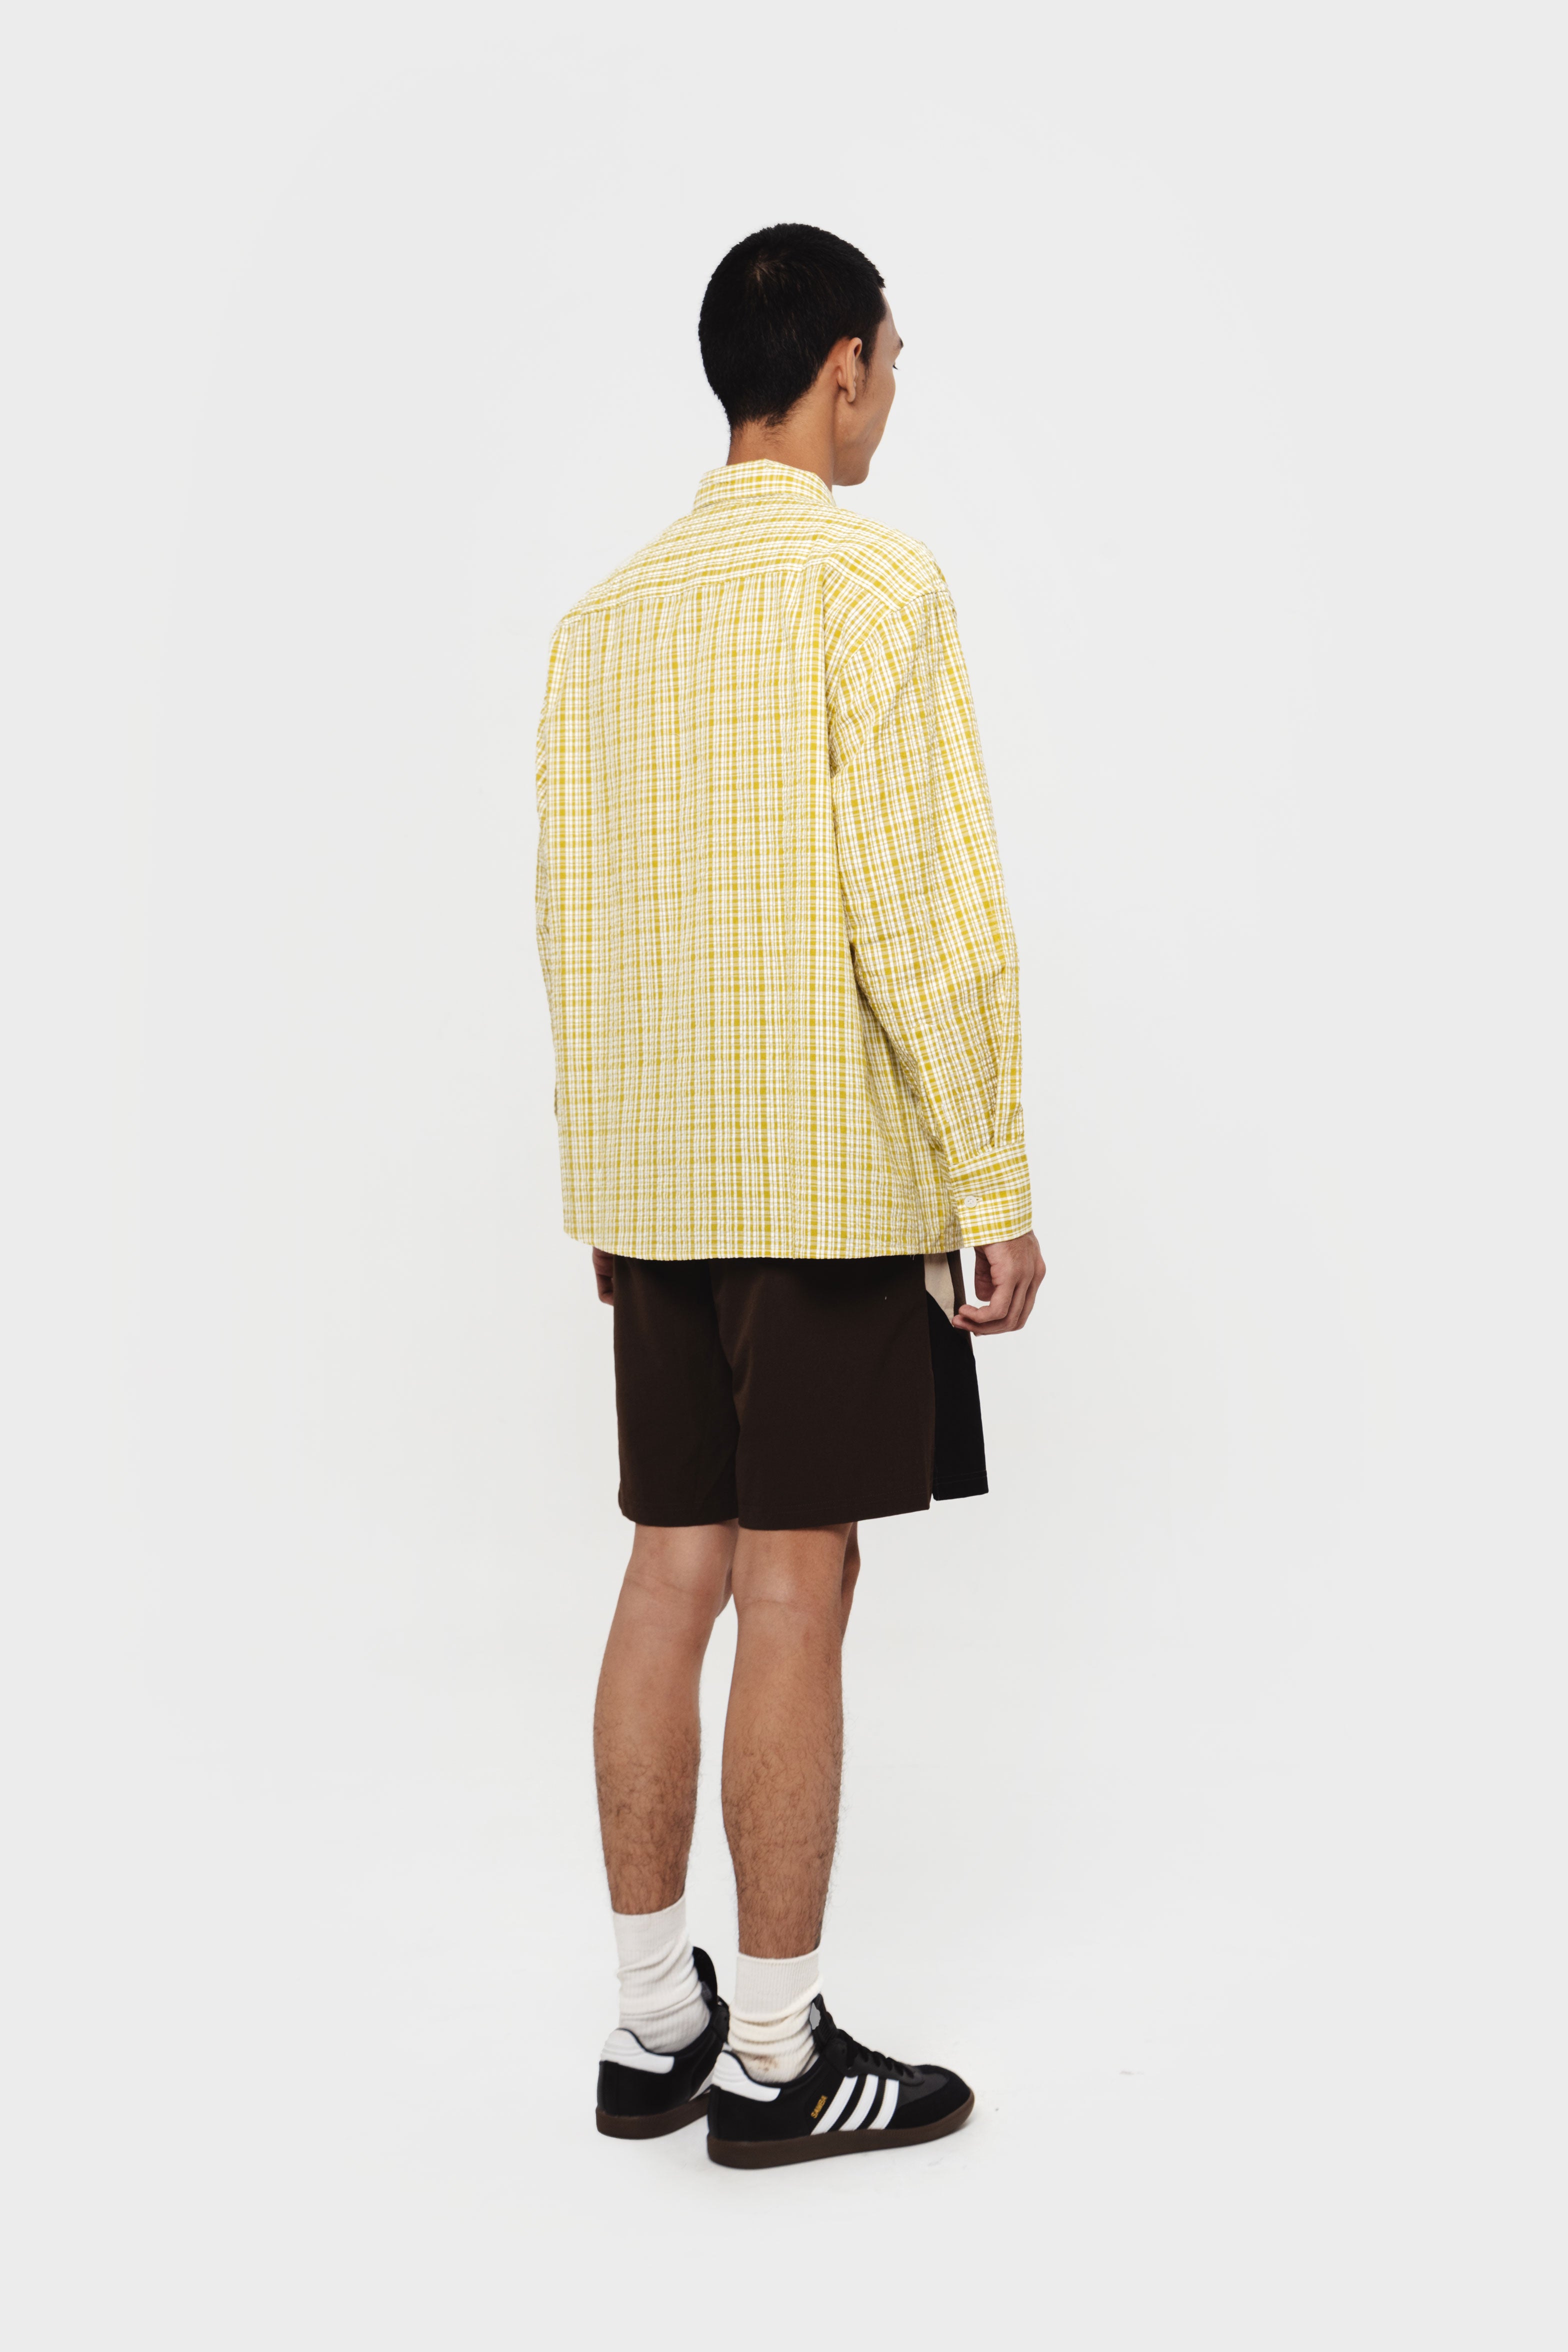 LITHGOW SHIRT YELLOW